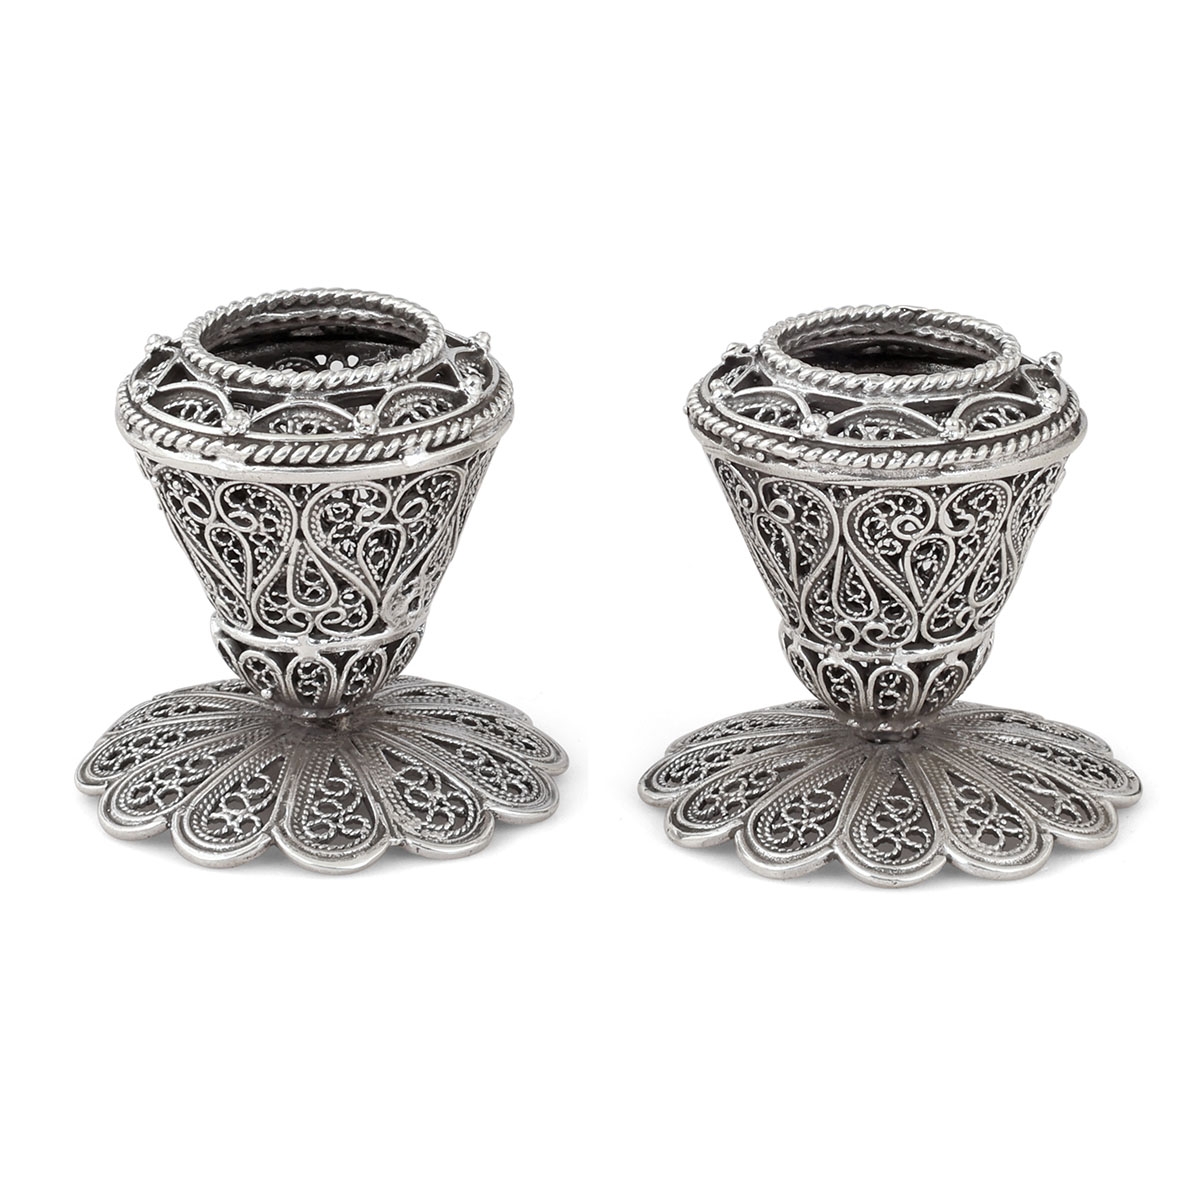 Traditional Yemenite Art Stylish Handcrafted Sterling Silver Candlesticks With Filigree Design - 1